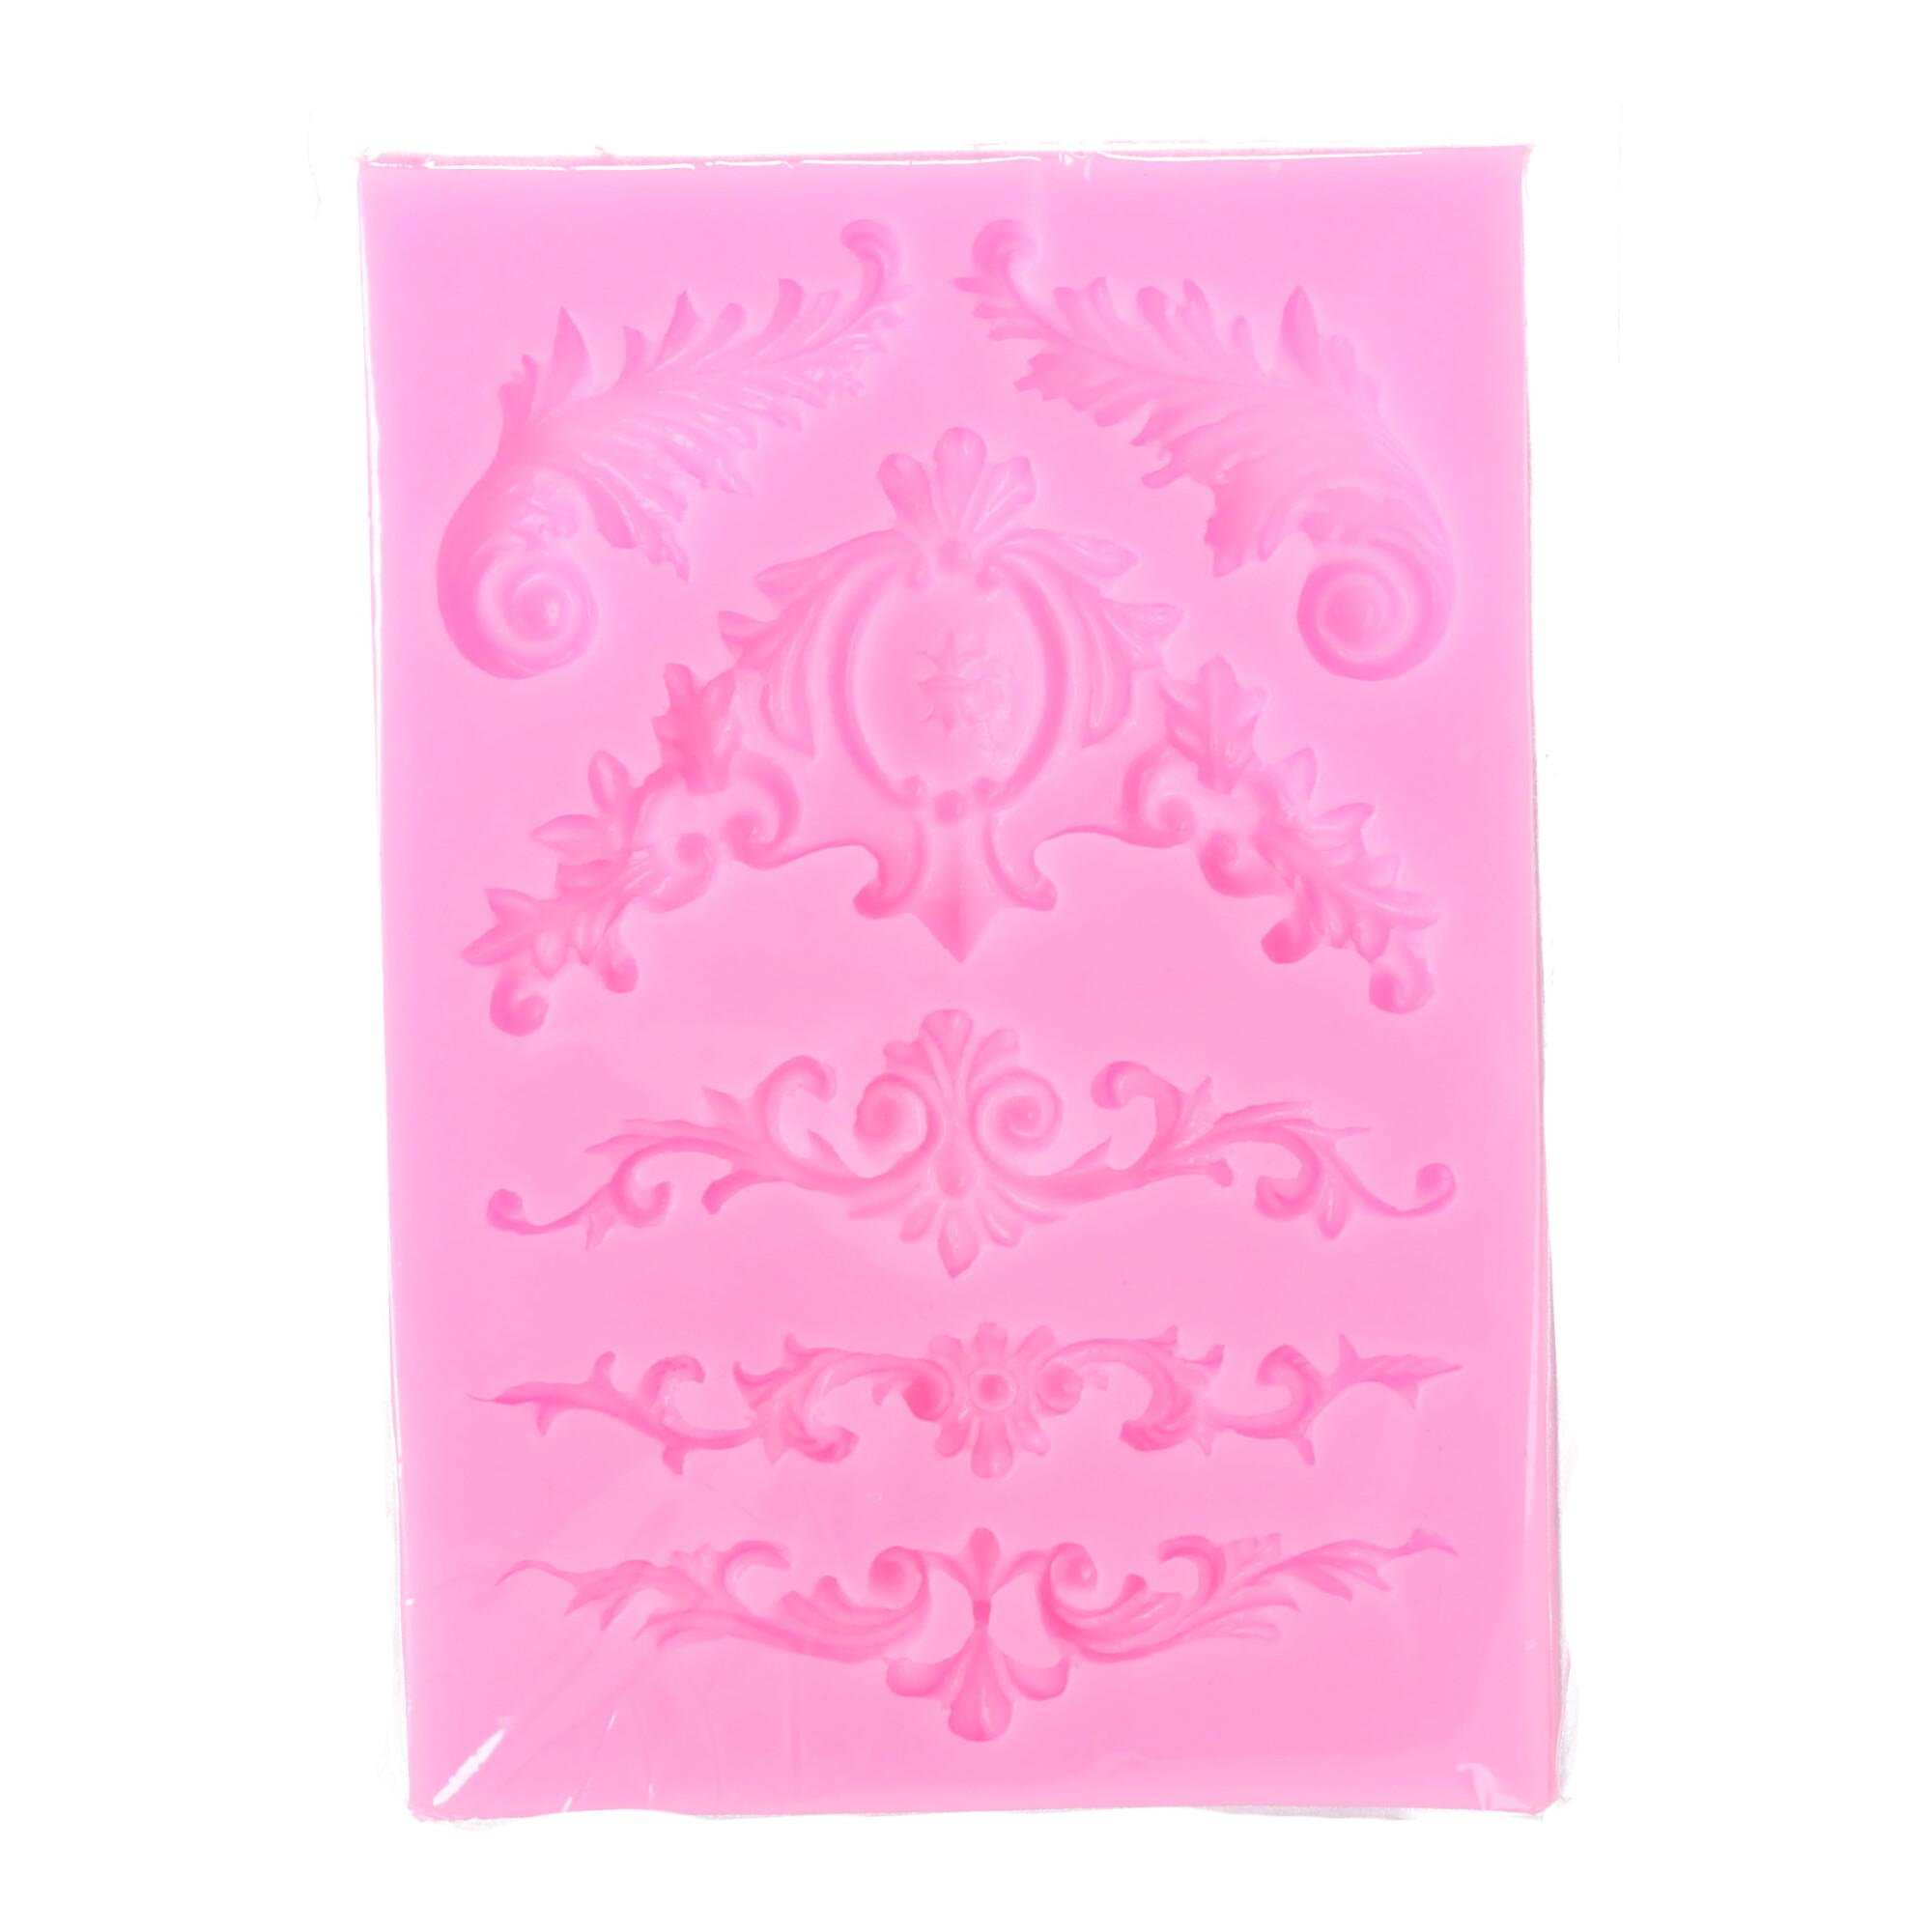 Silicone mold for decorating cakes, cake